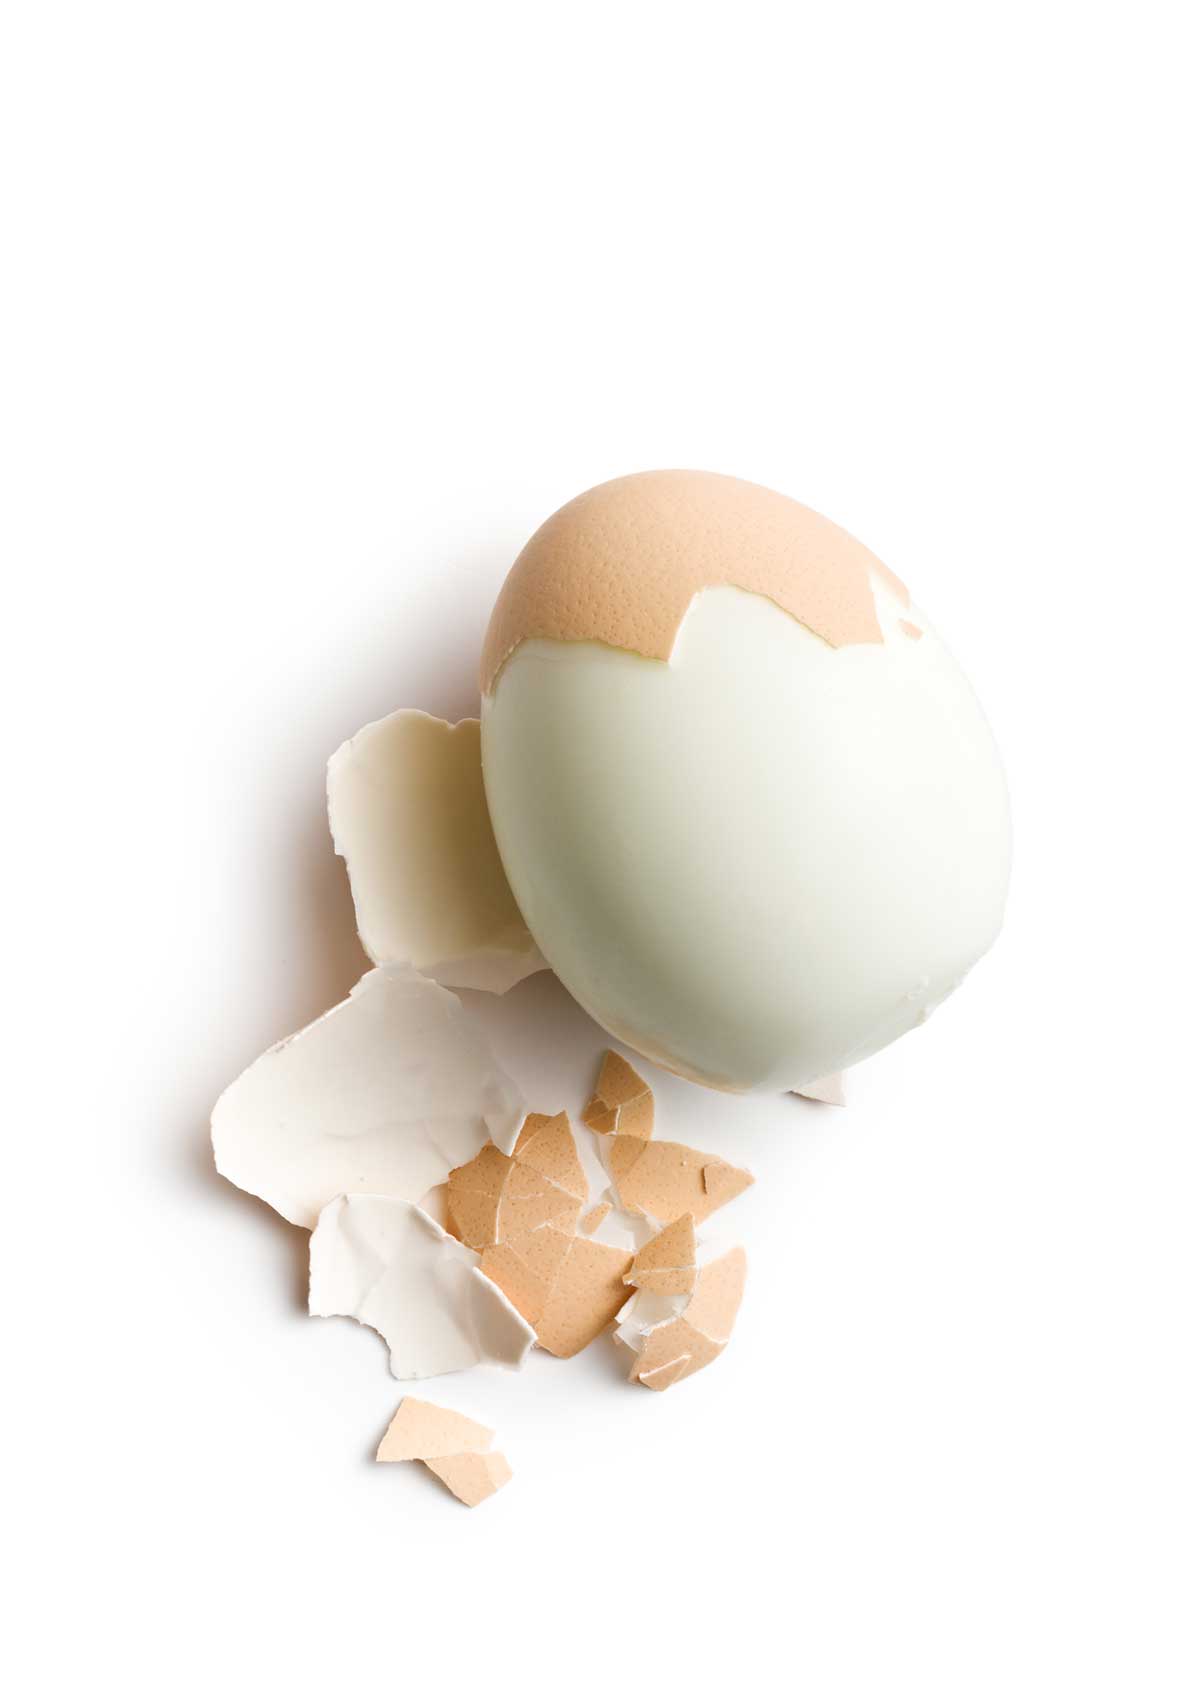 Steaming eggs is the best way to make peeling hard-boiled eggs easy